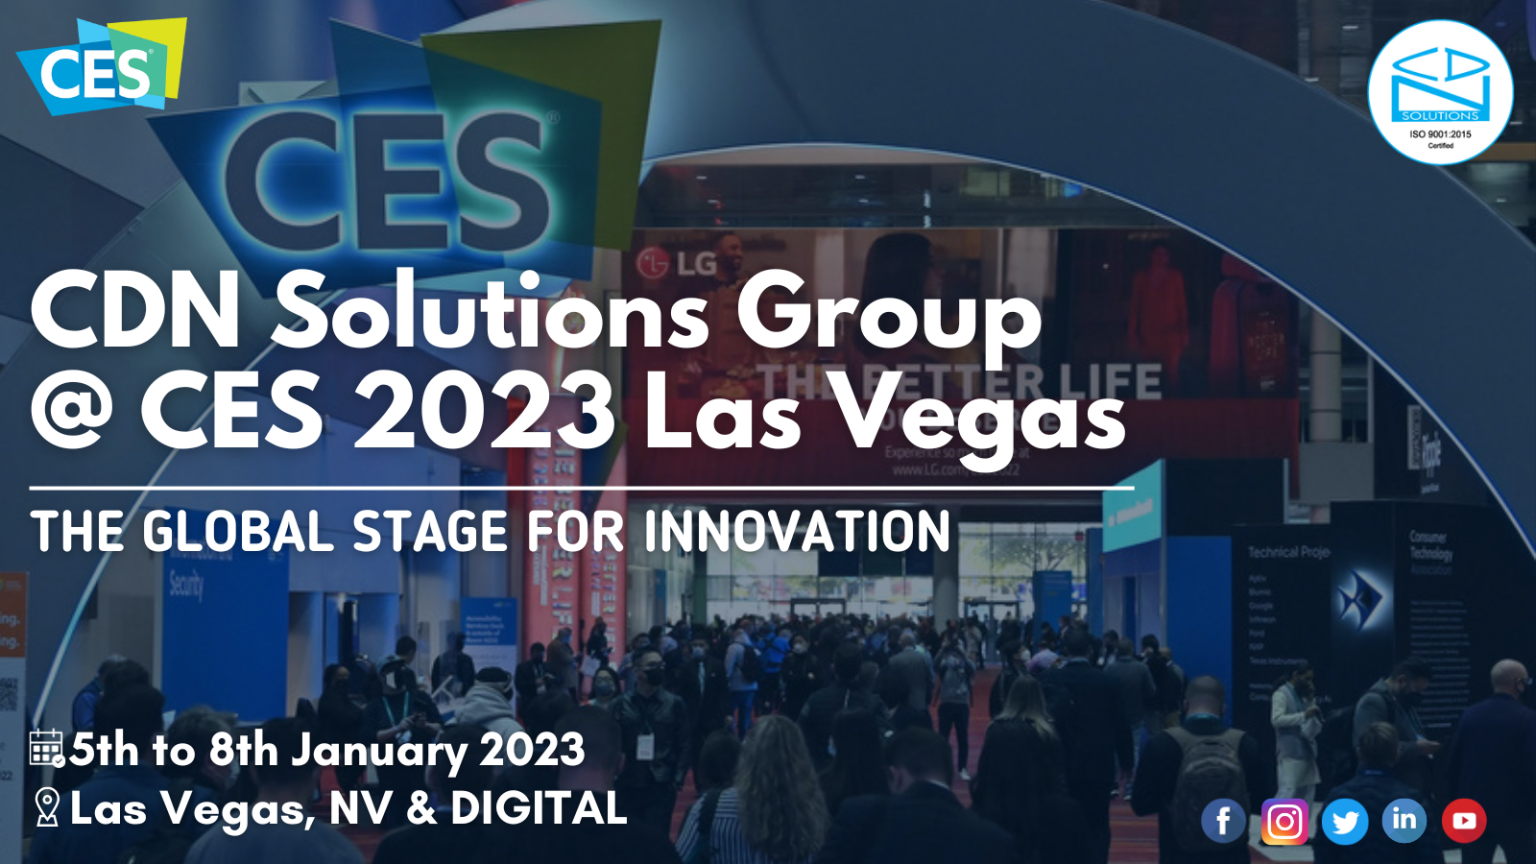 CES 2023 Exhibitor List CDN Solutions Group